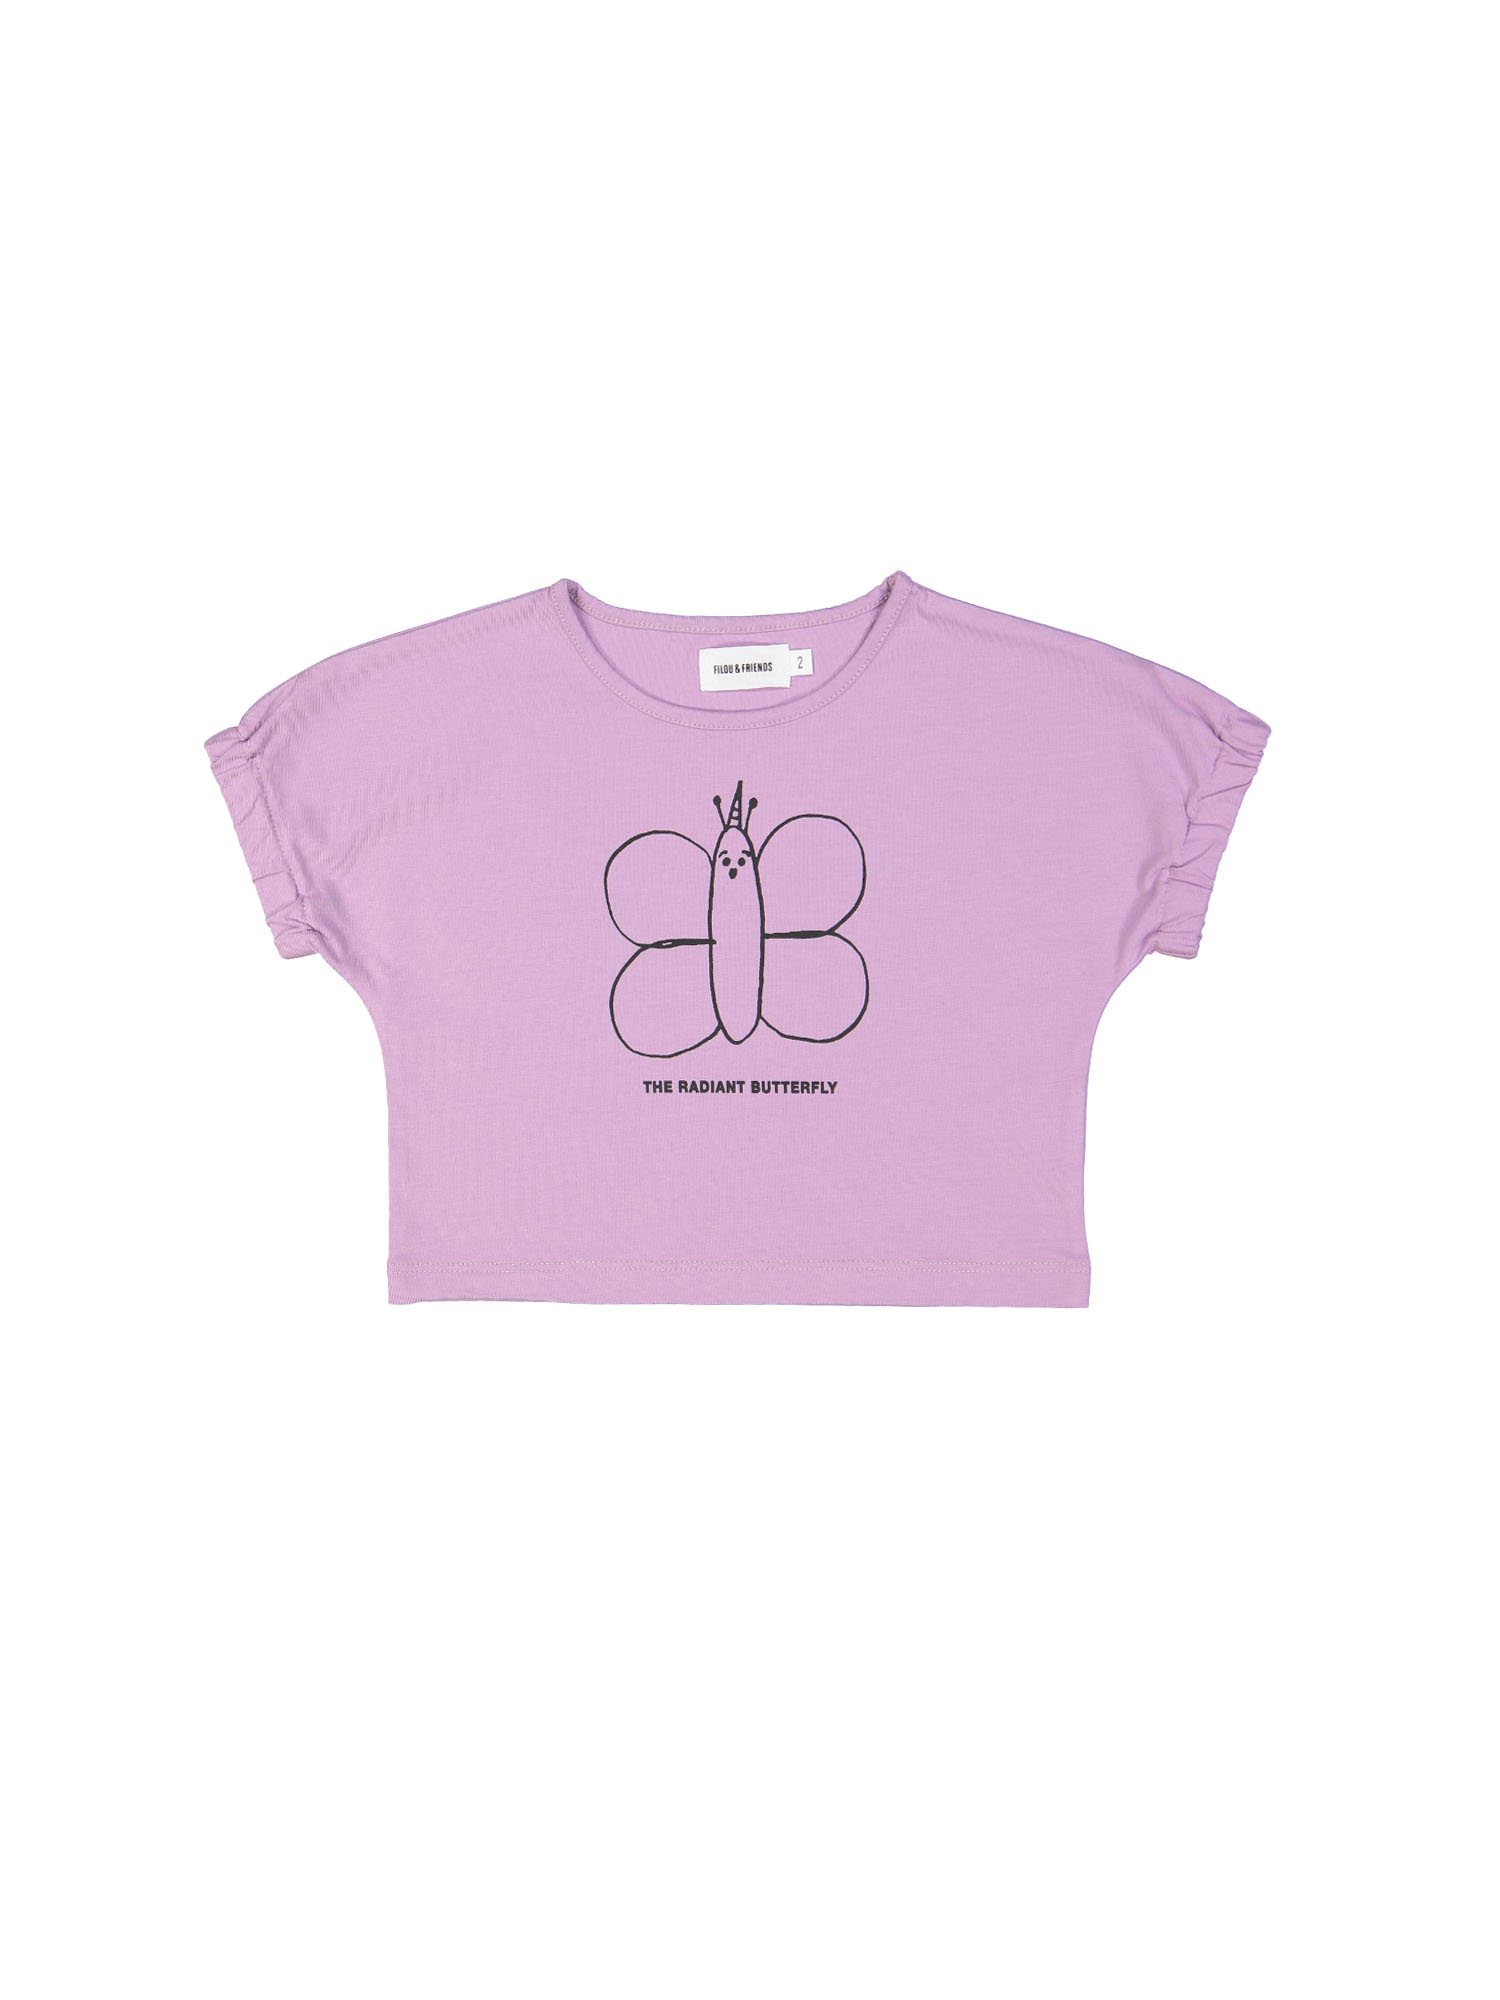 t-shirt boxy radiant butterfly paars 03j